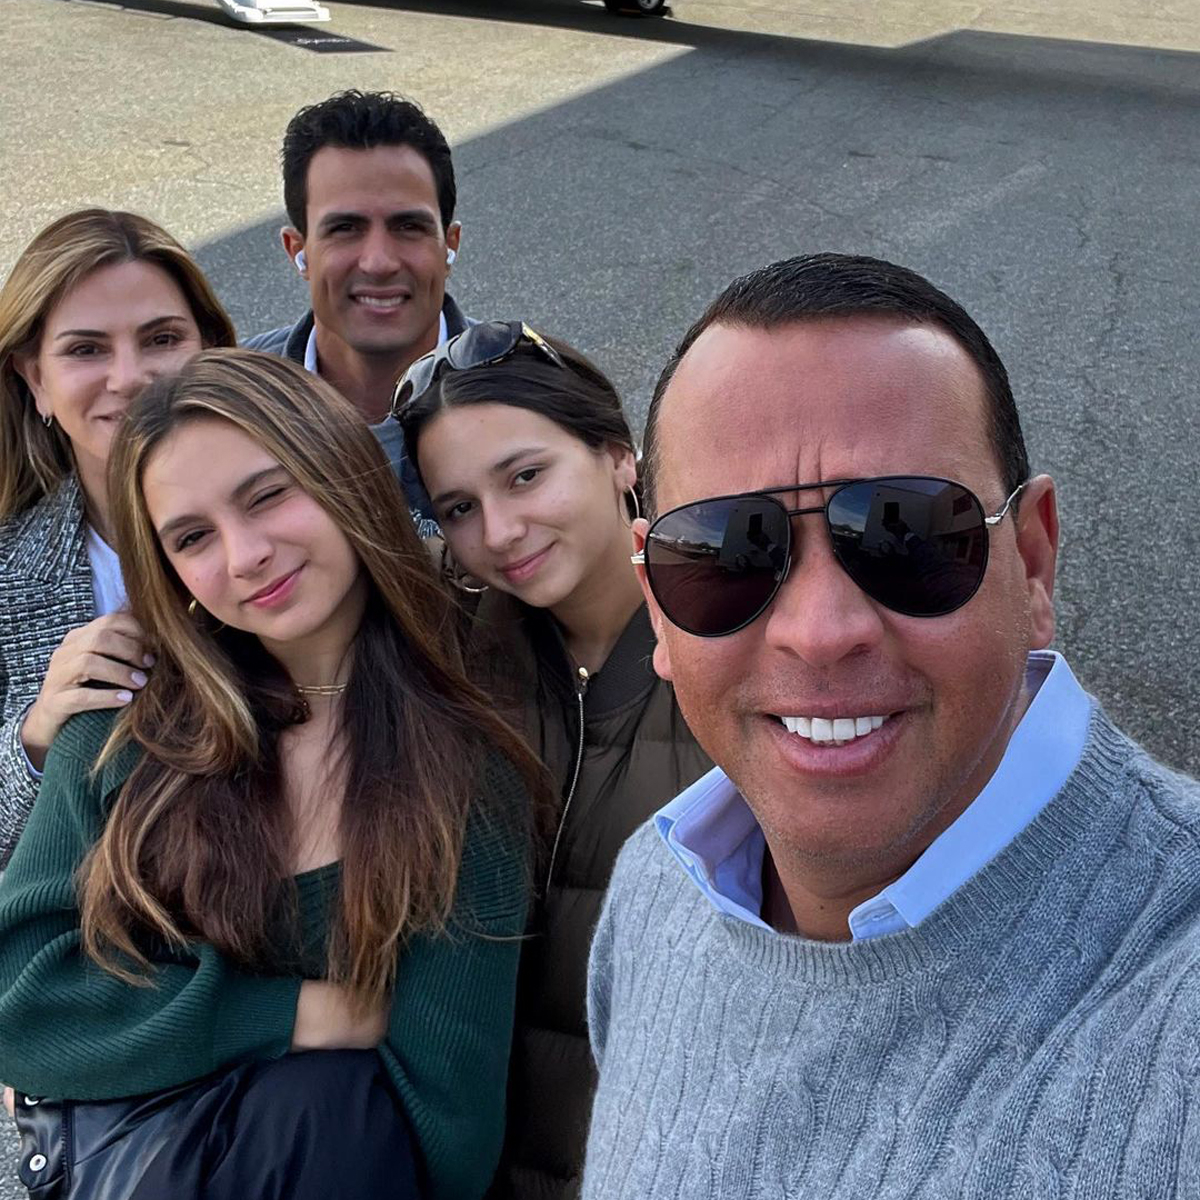 Who is Alex Rodriguez' ex-wife Cynthia Scurtis?